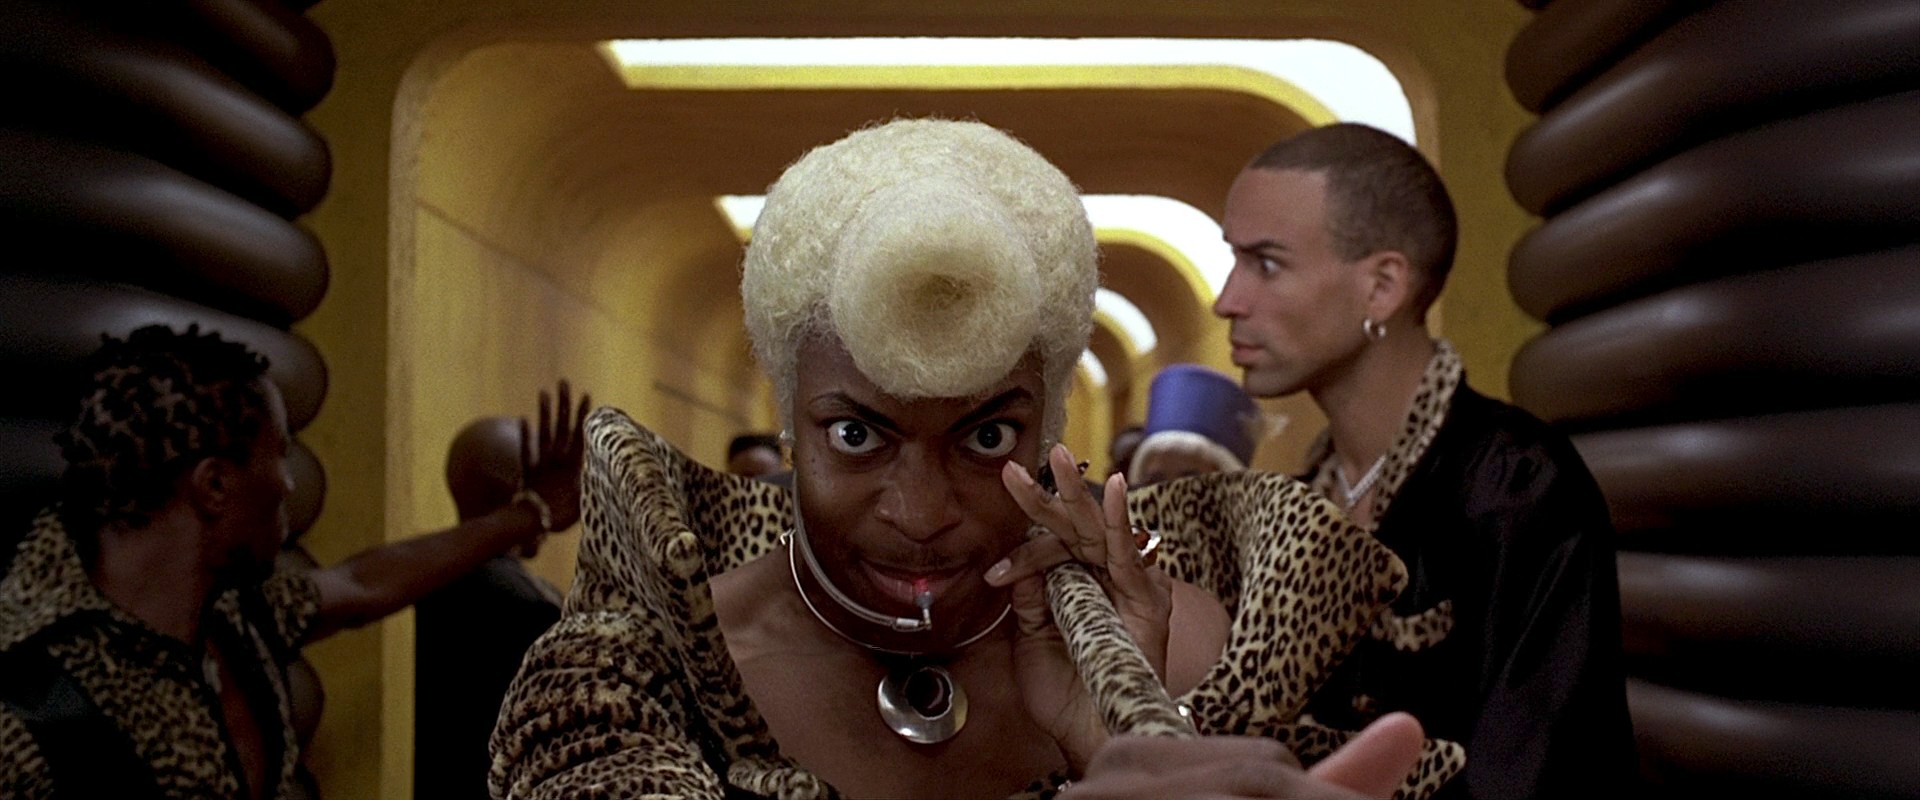 the fifth element full movie hdd